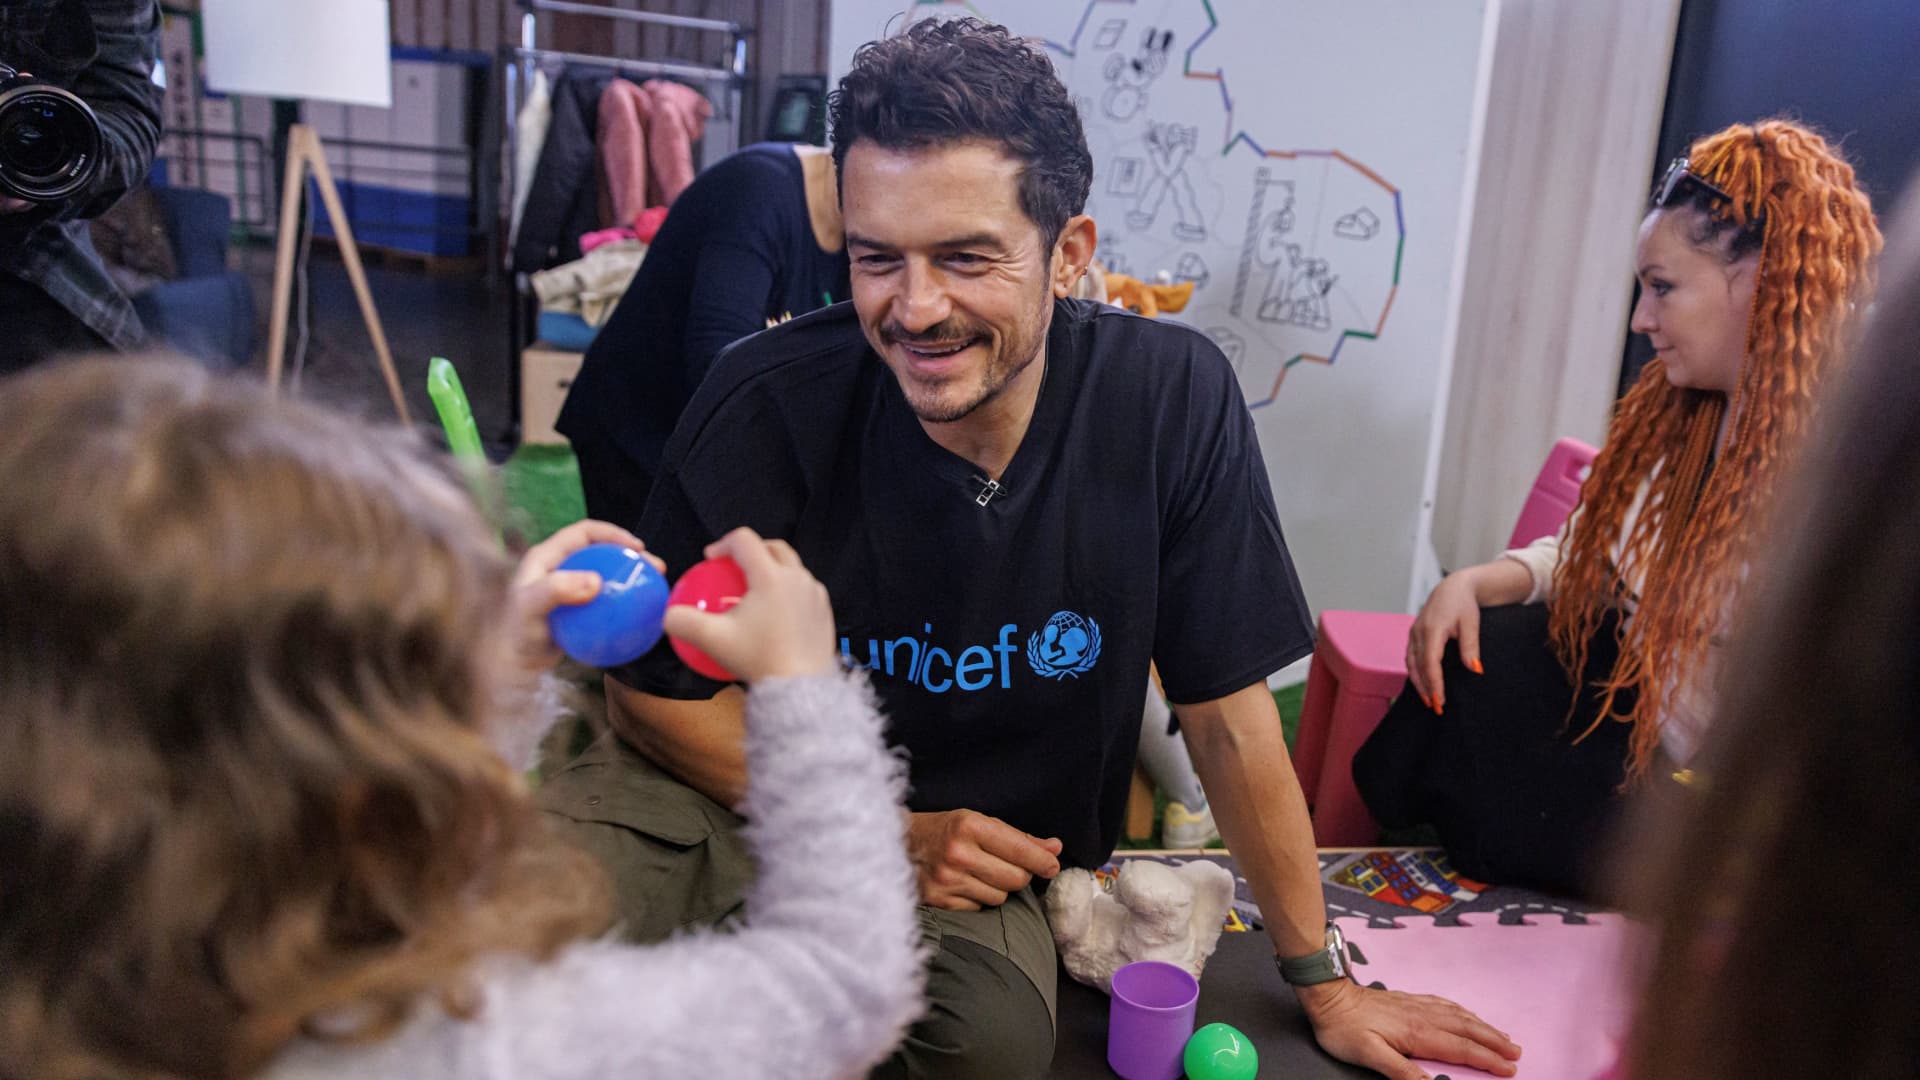 Actor and UNICEF Goodwill Ambassador Orlando Bloom plays with children in the UNICEF Spilno Child Spot at a metro station in Kyiv, Ukraine March 25, 2023 in this handout image. 